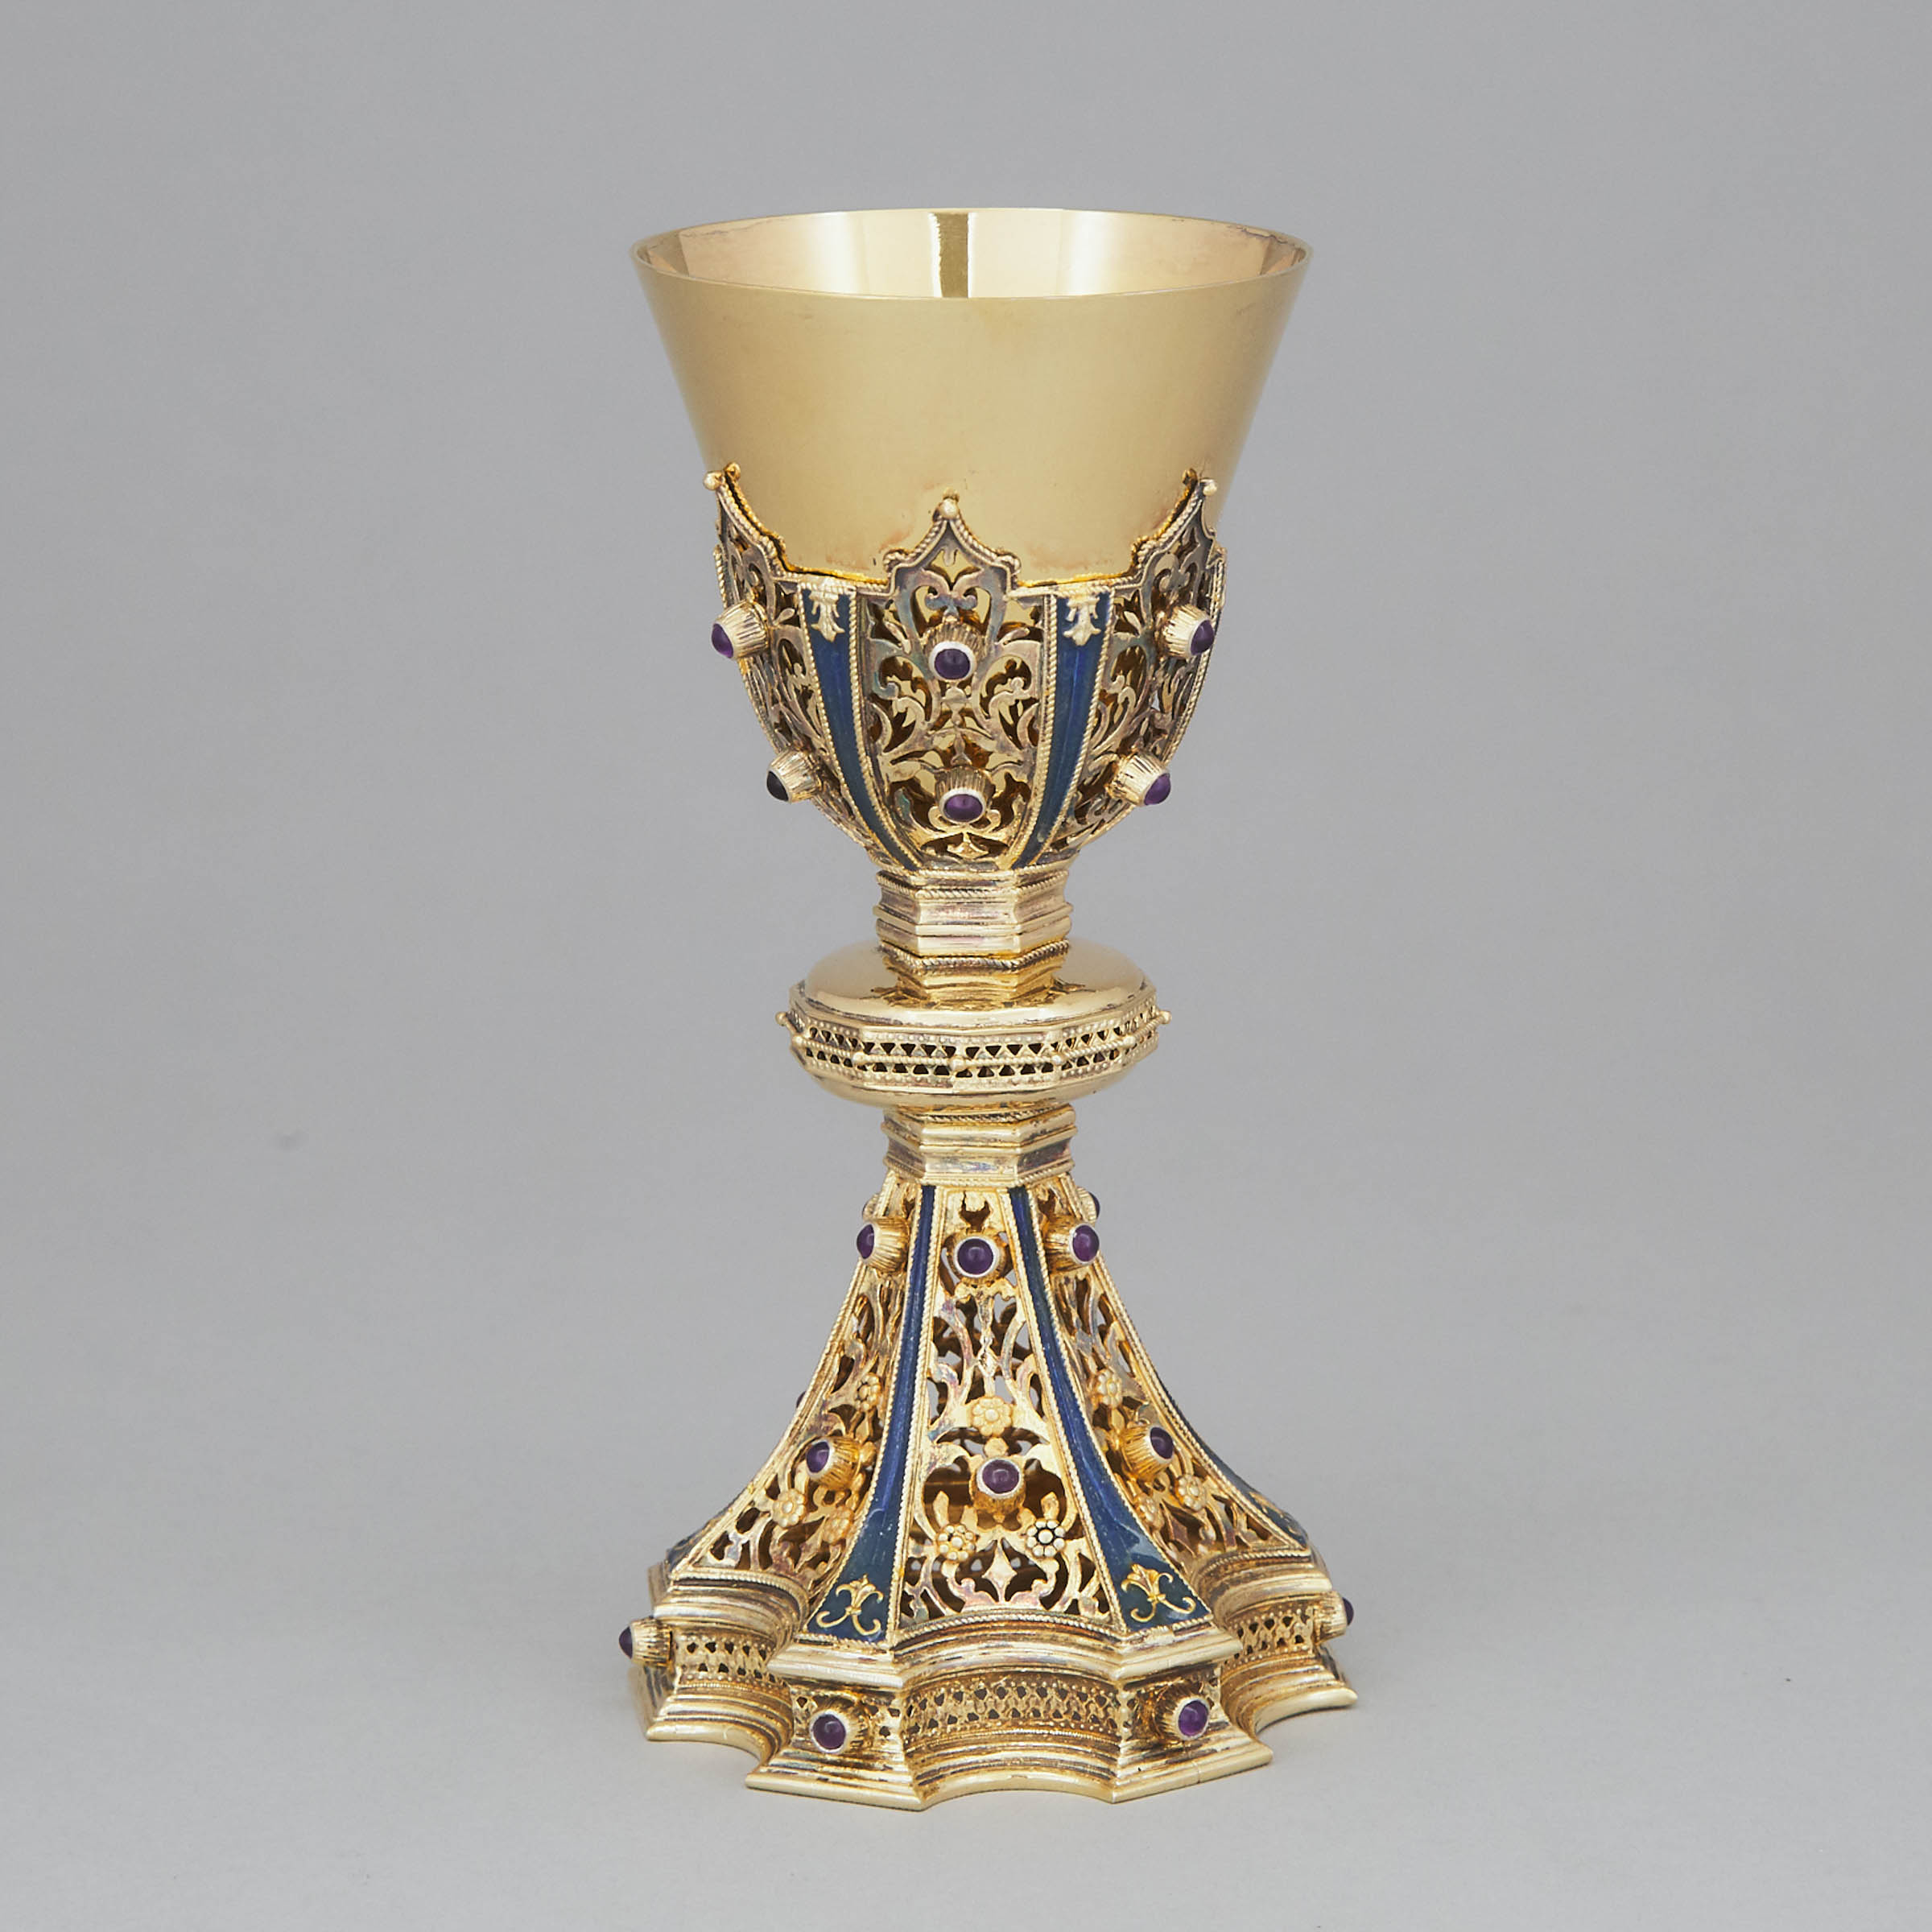 Continental Enameled Silver-Gilt Goblet, 20th century 